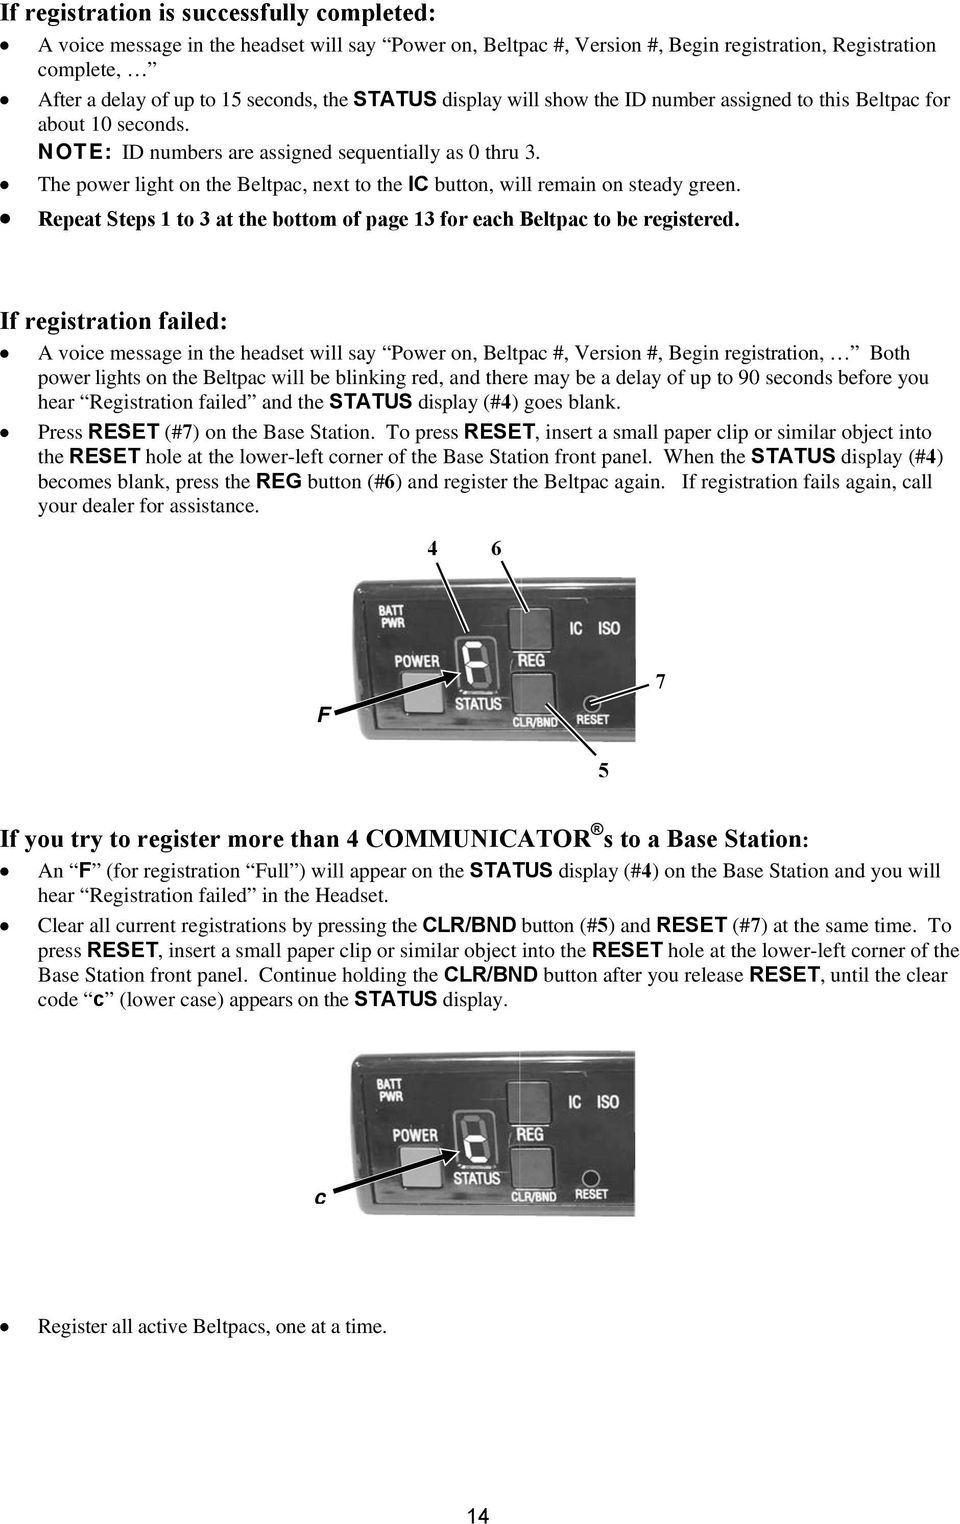 The power light on the Beltpac, next to the IC button, will remain on steady green. Repeat Steps 1 to 3 at the bottom of page 13 for each Beltpac to be registered.